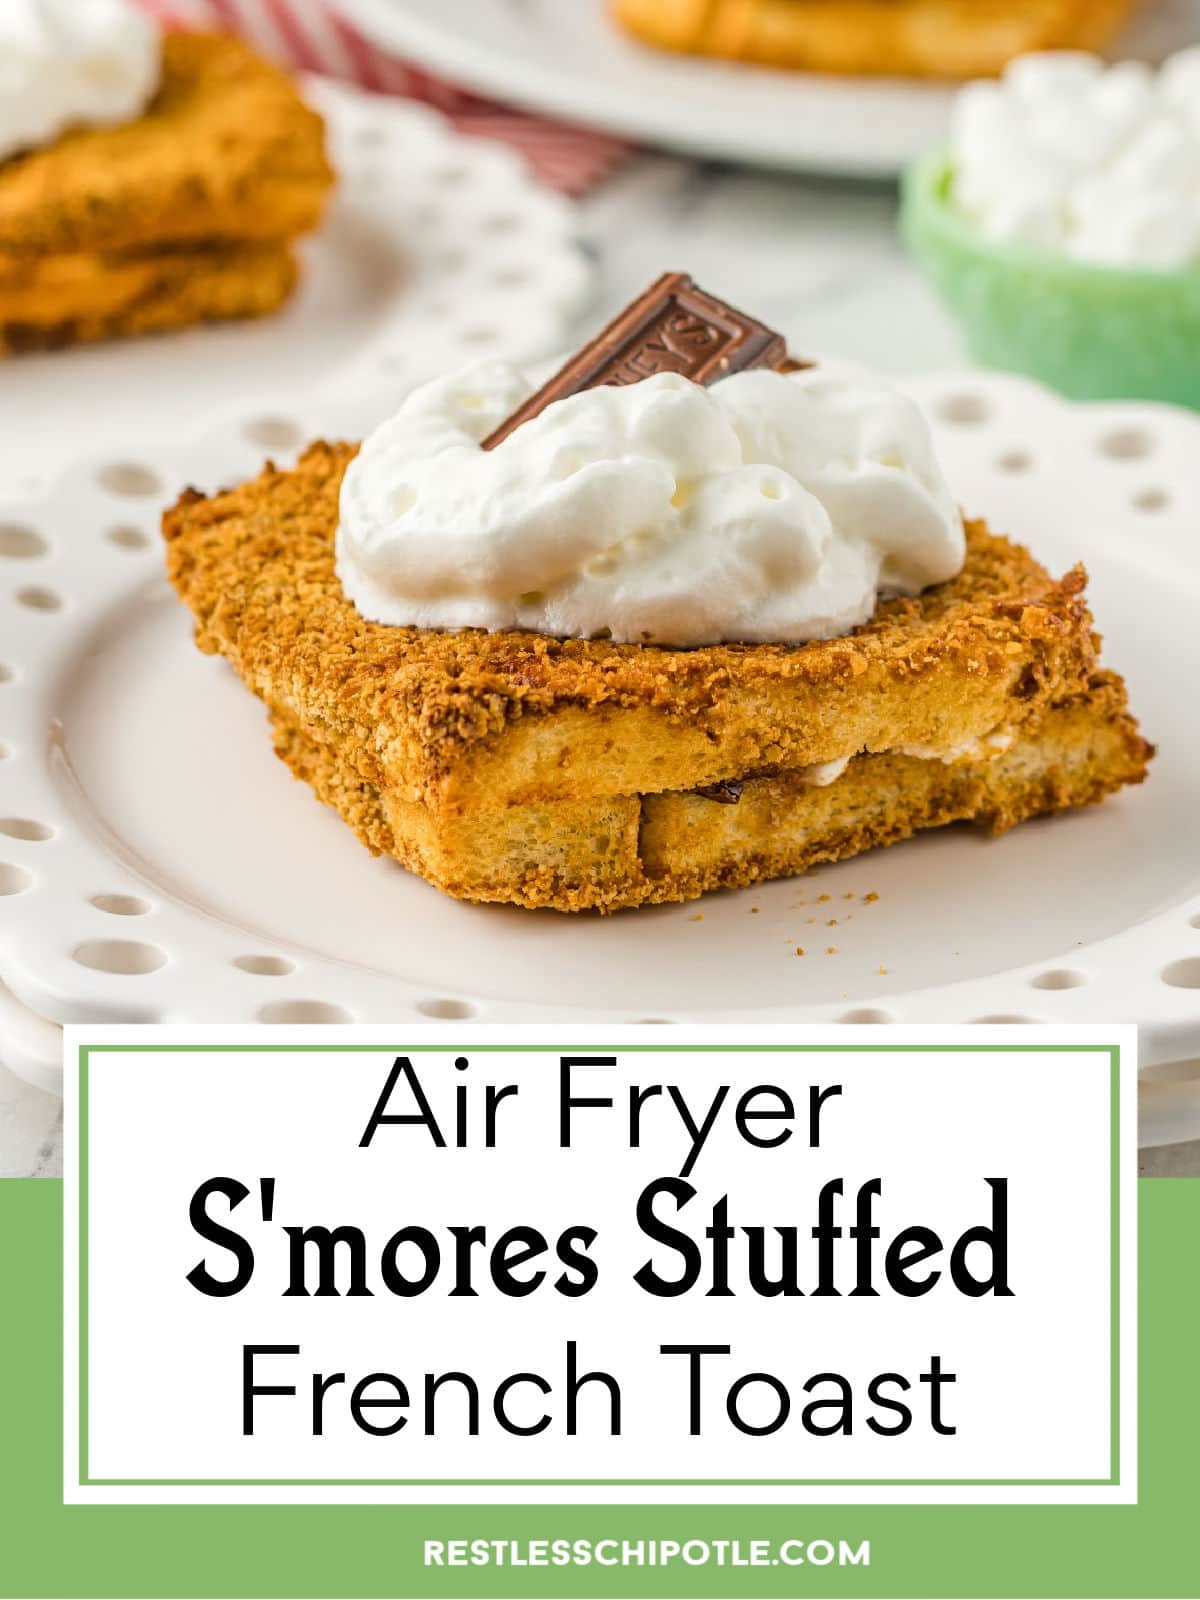 S'more's Stuffed French Toast